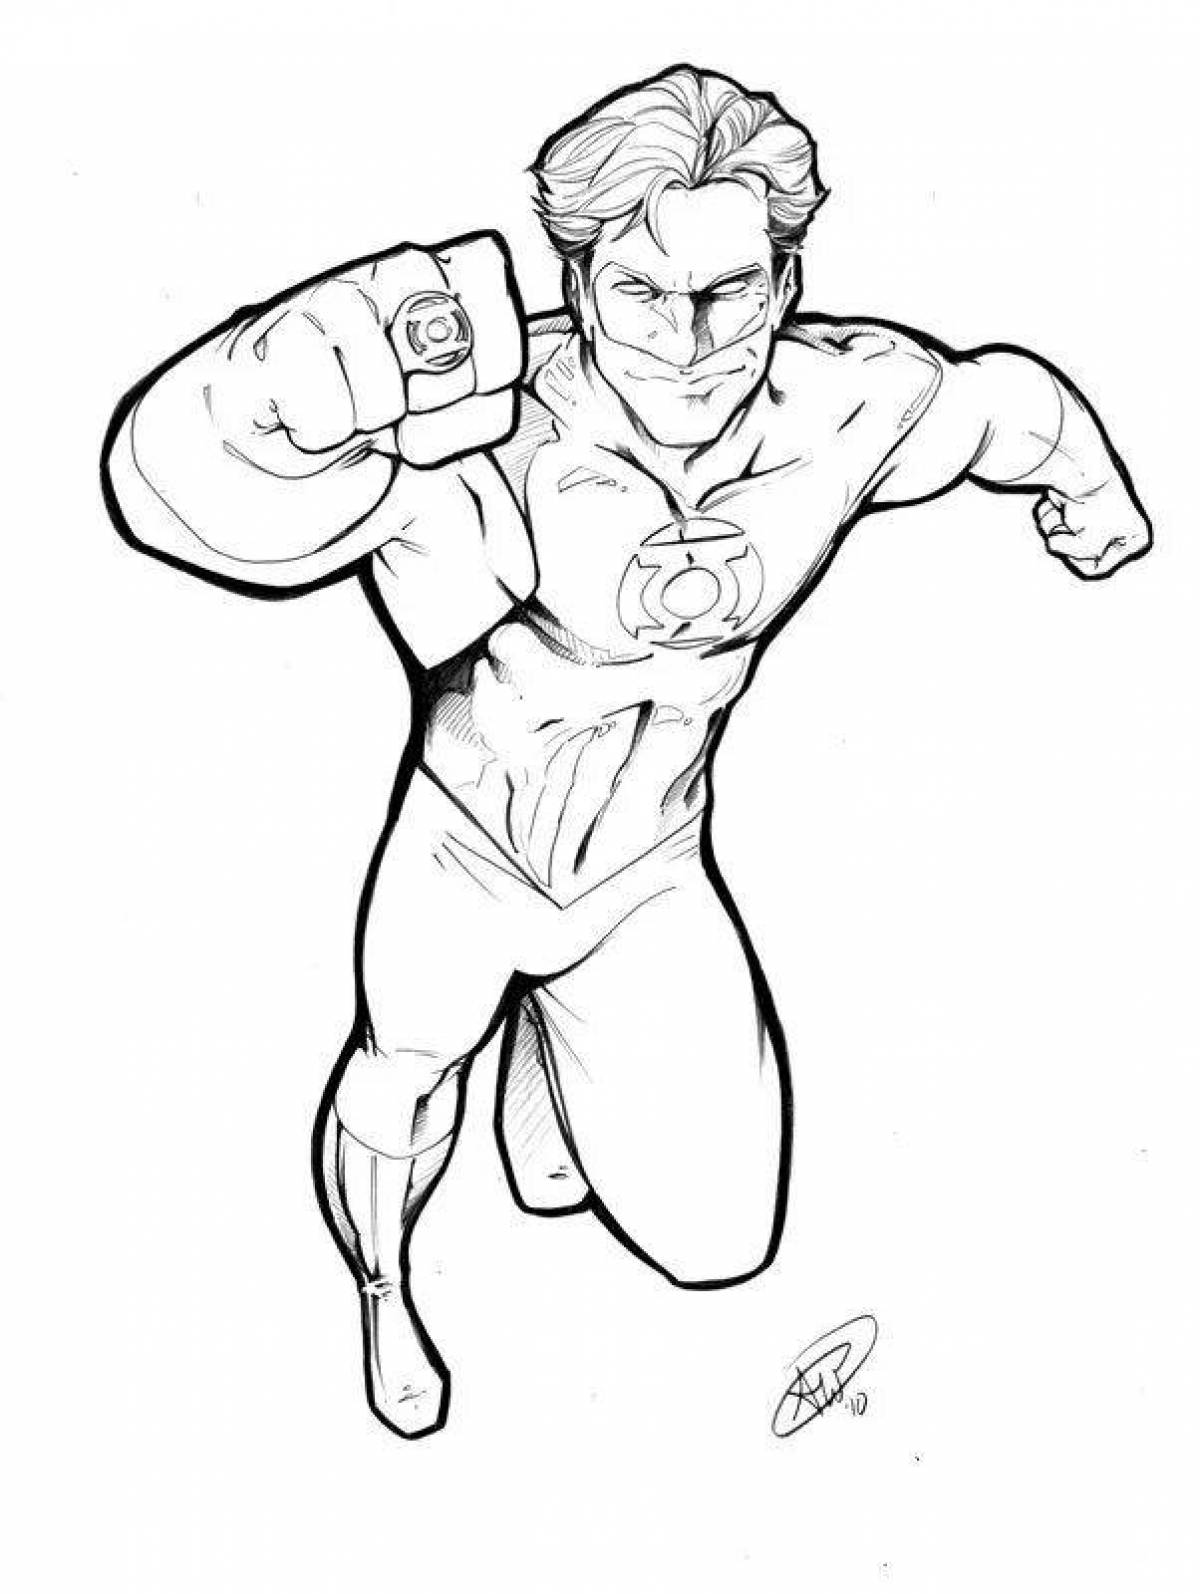 Awesome green lantern coloring page